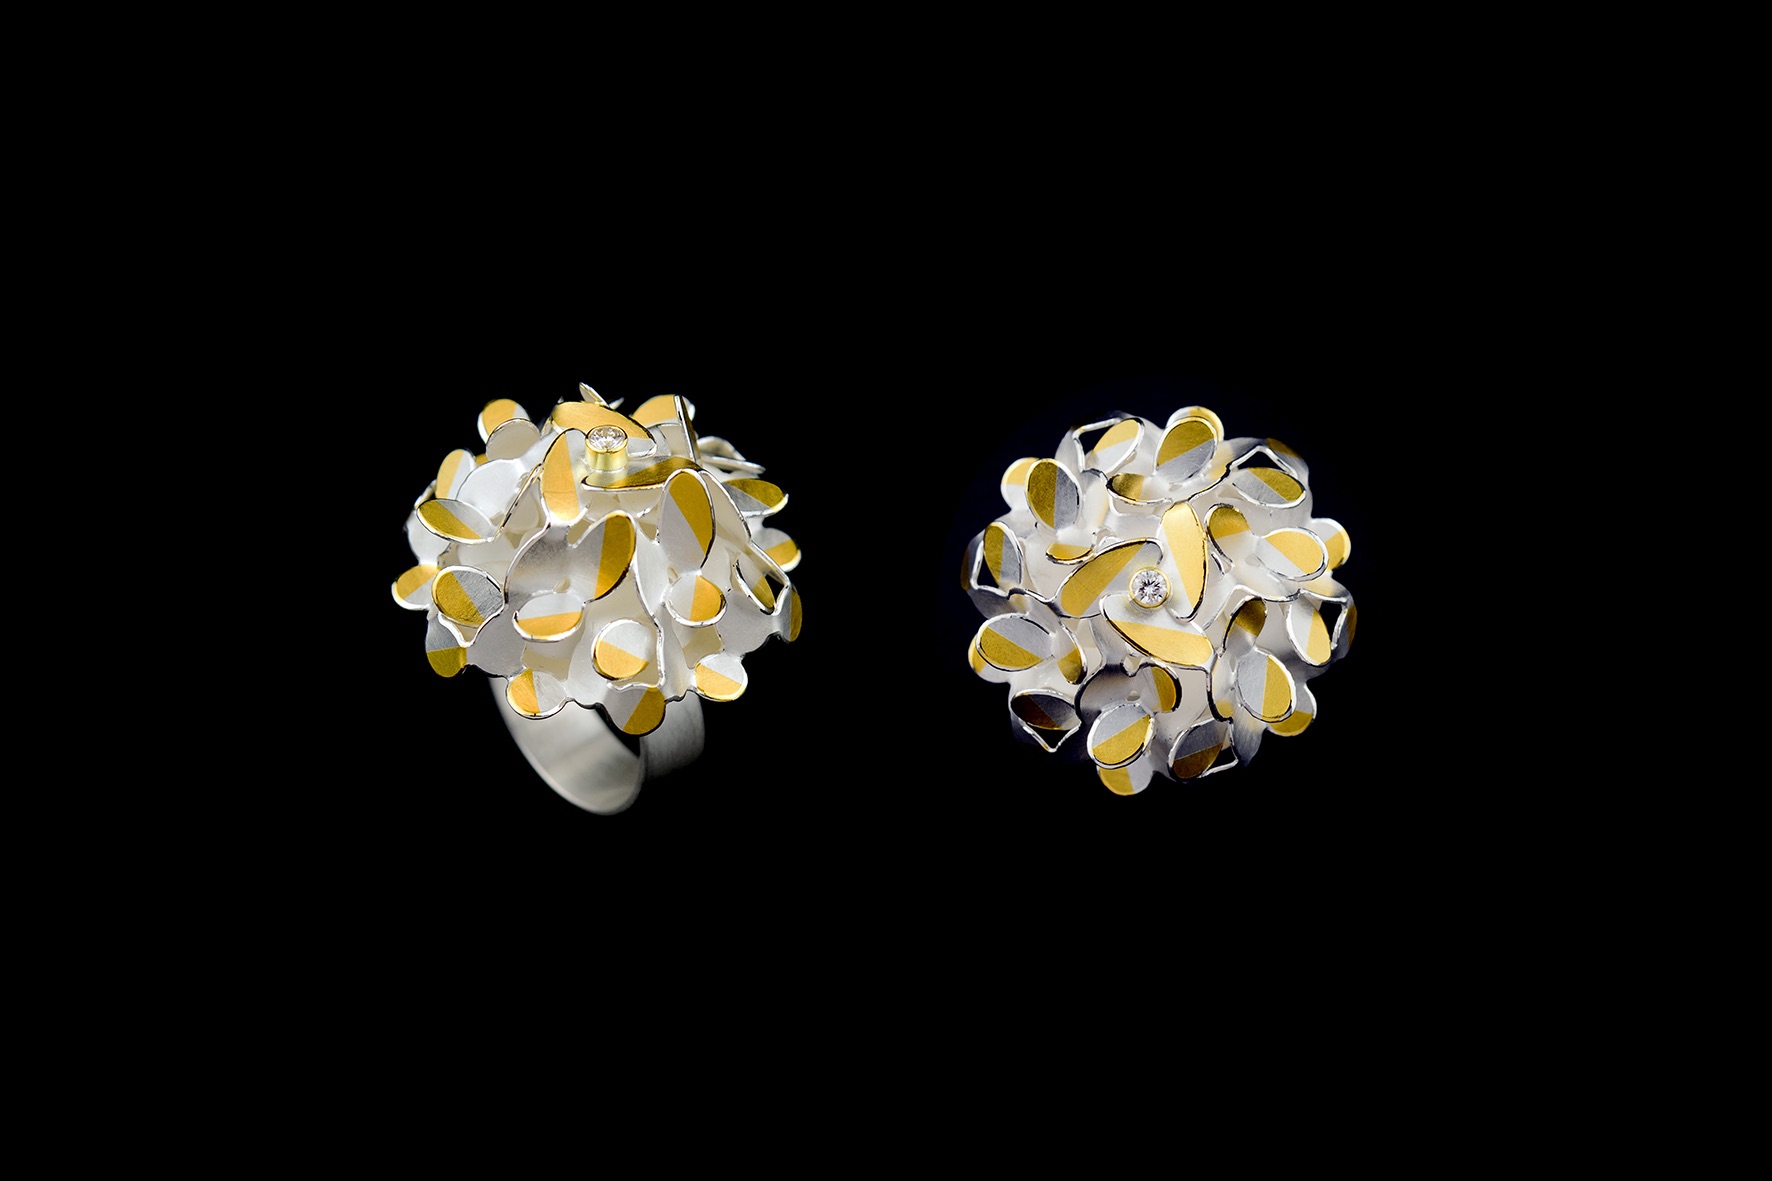 Circular ovals flower ring with diamond